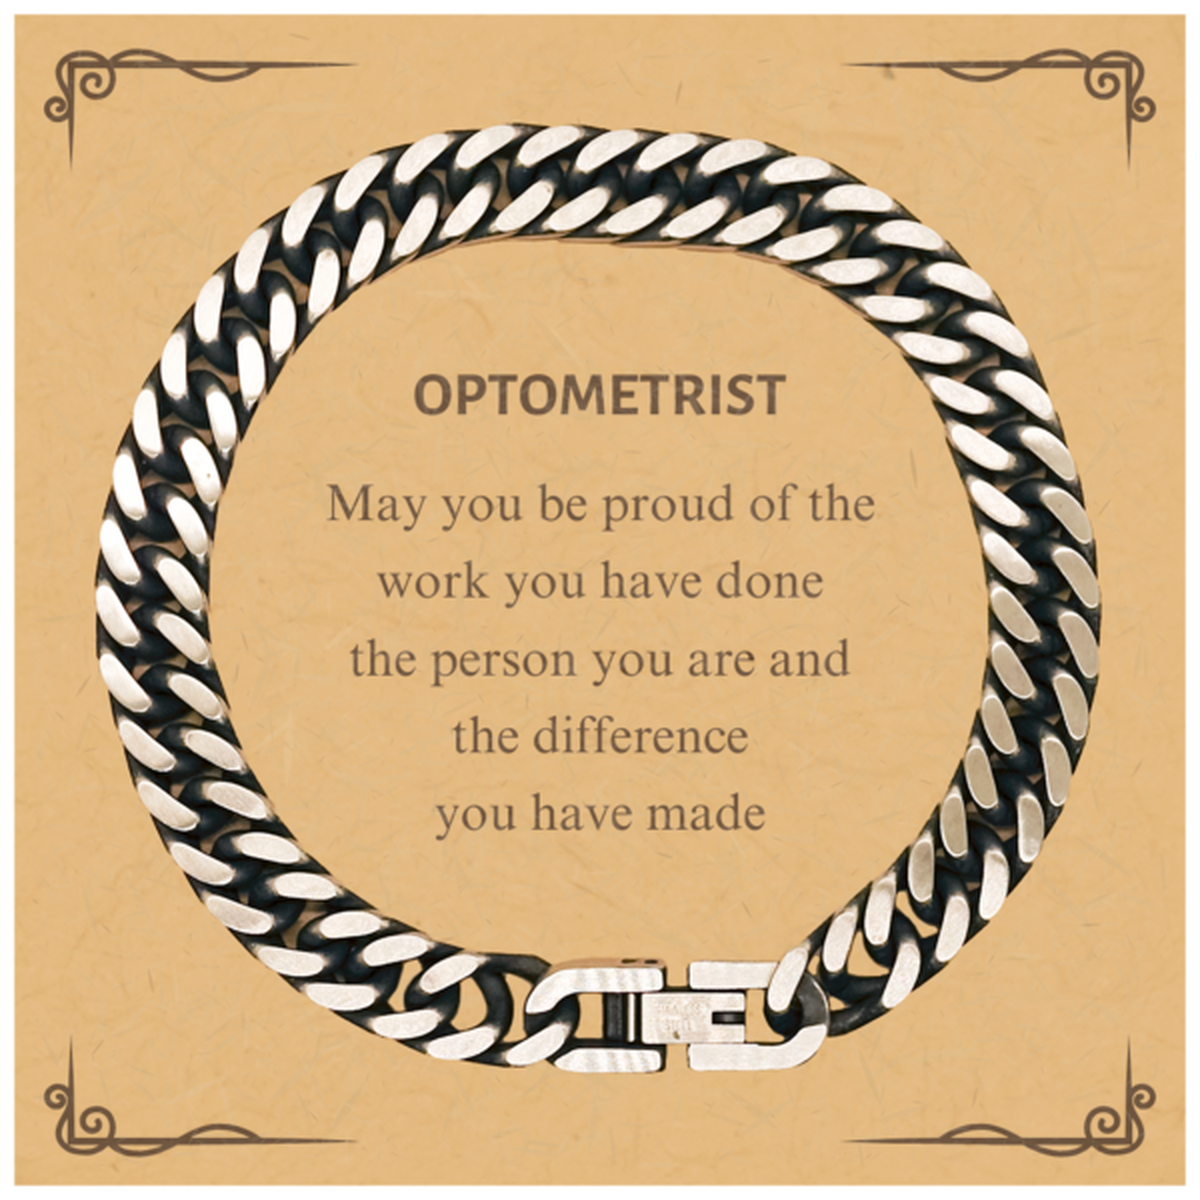 Optometrist May you be proud of the work you have done, Retirement Optometrist Cuban Link Chain Bracelet for Colleague Appreciation Gifts Amazing for Optometrist